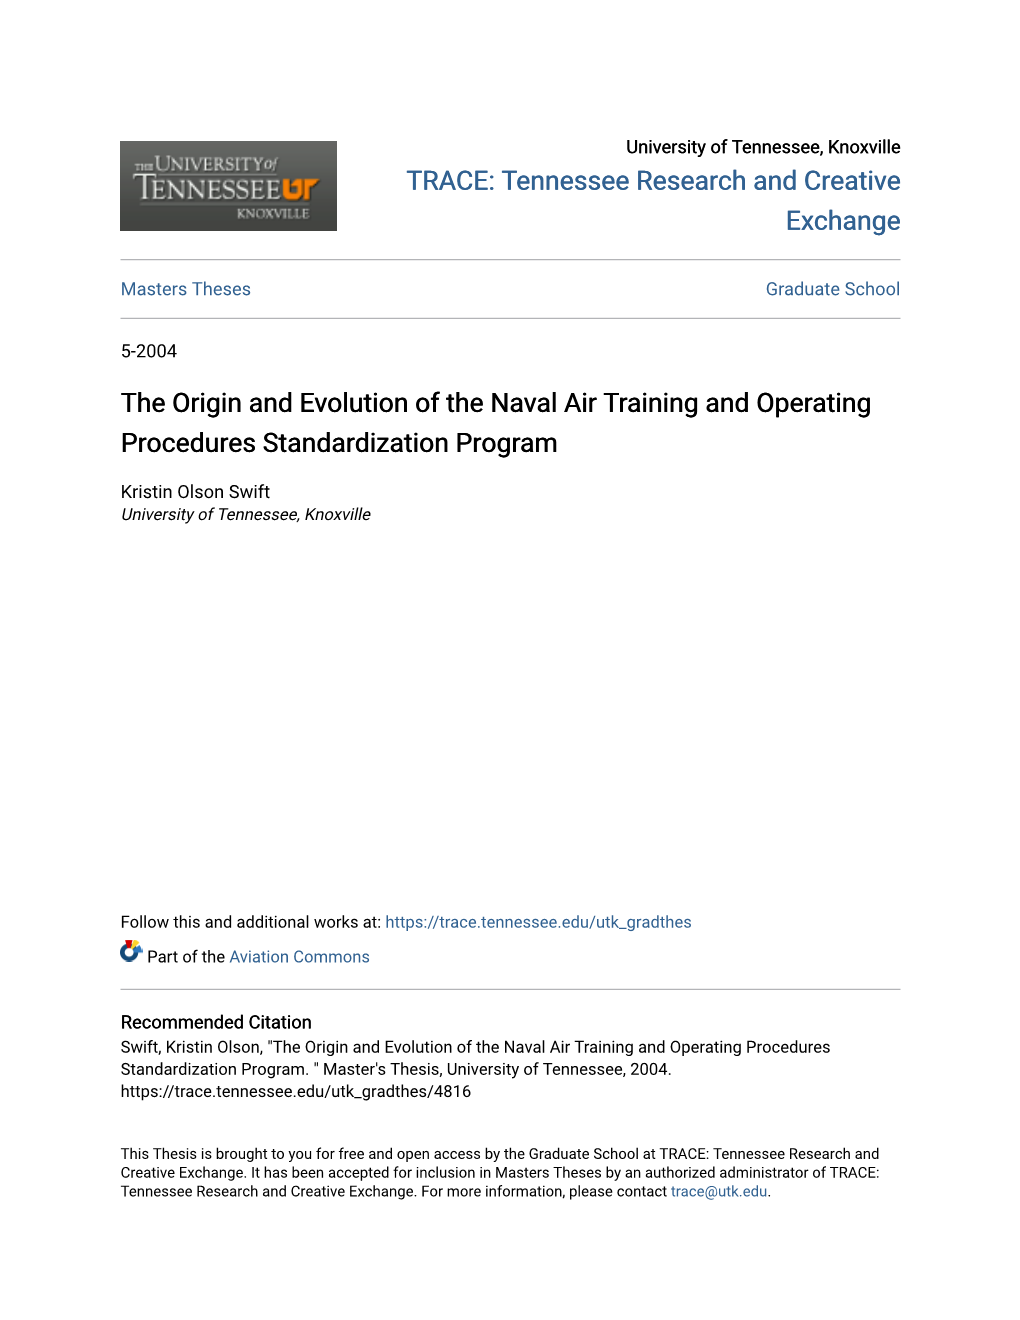 The Origin and Evolution of the Naval Air Training and Operating Procedures Standardization Program